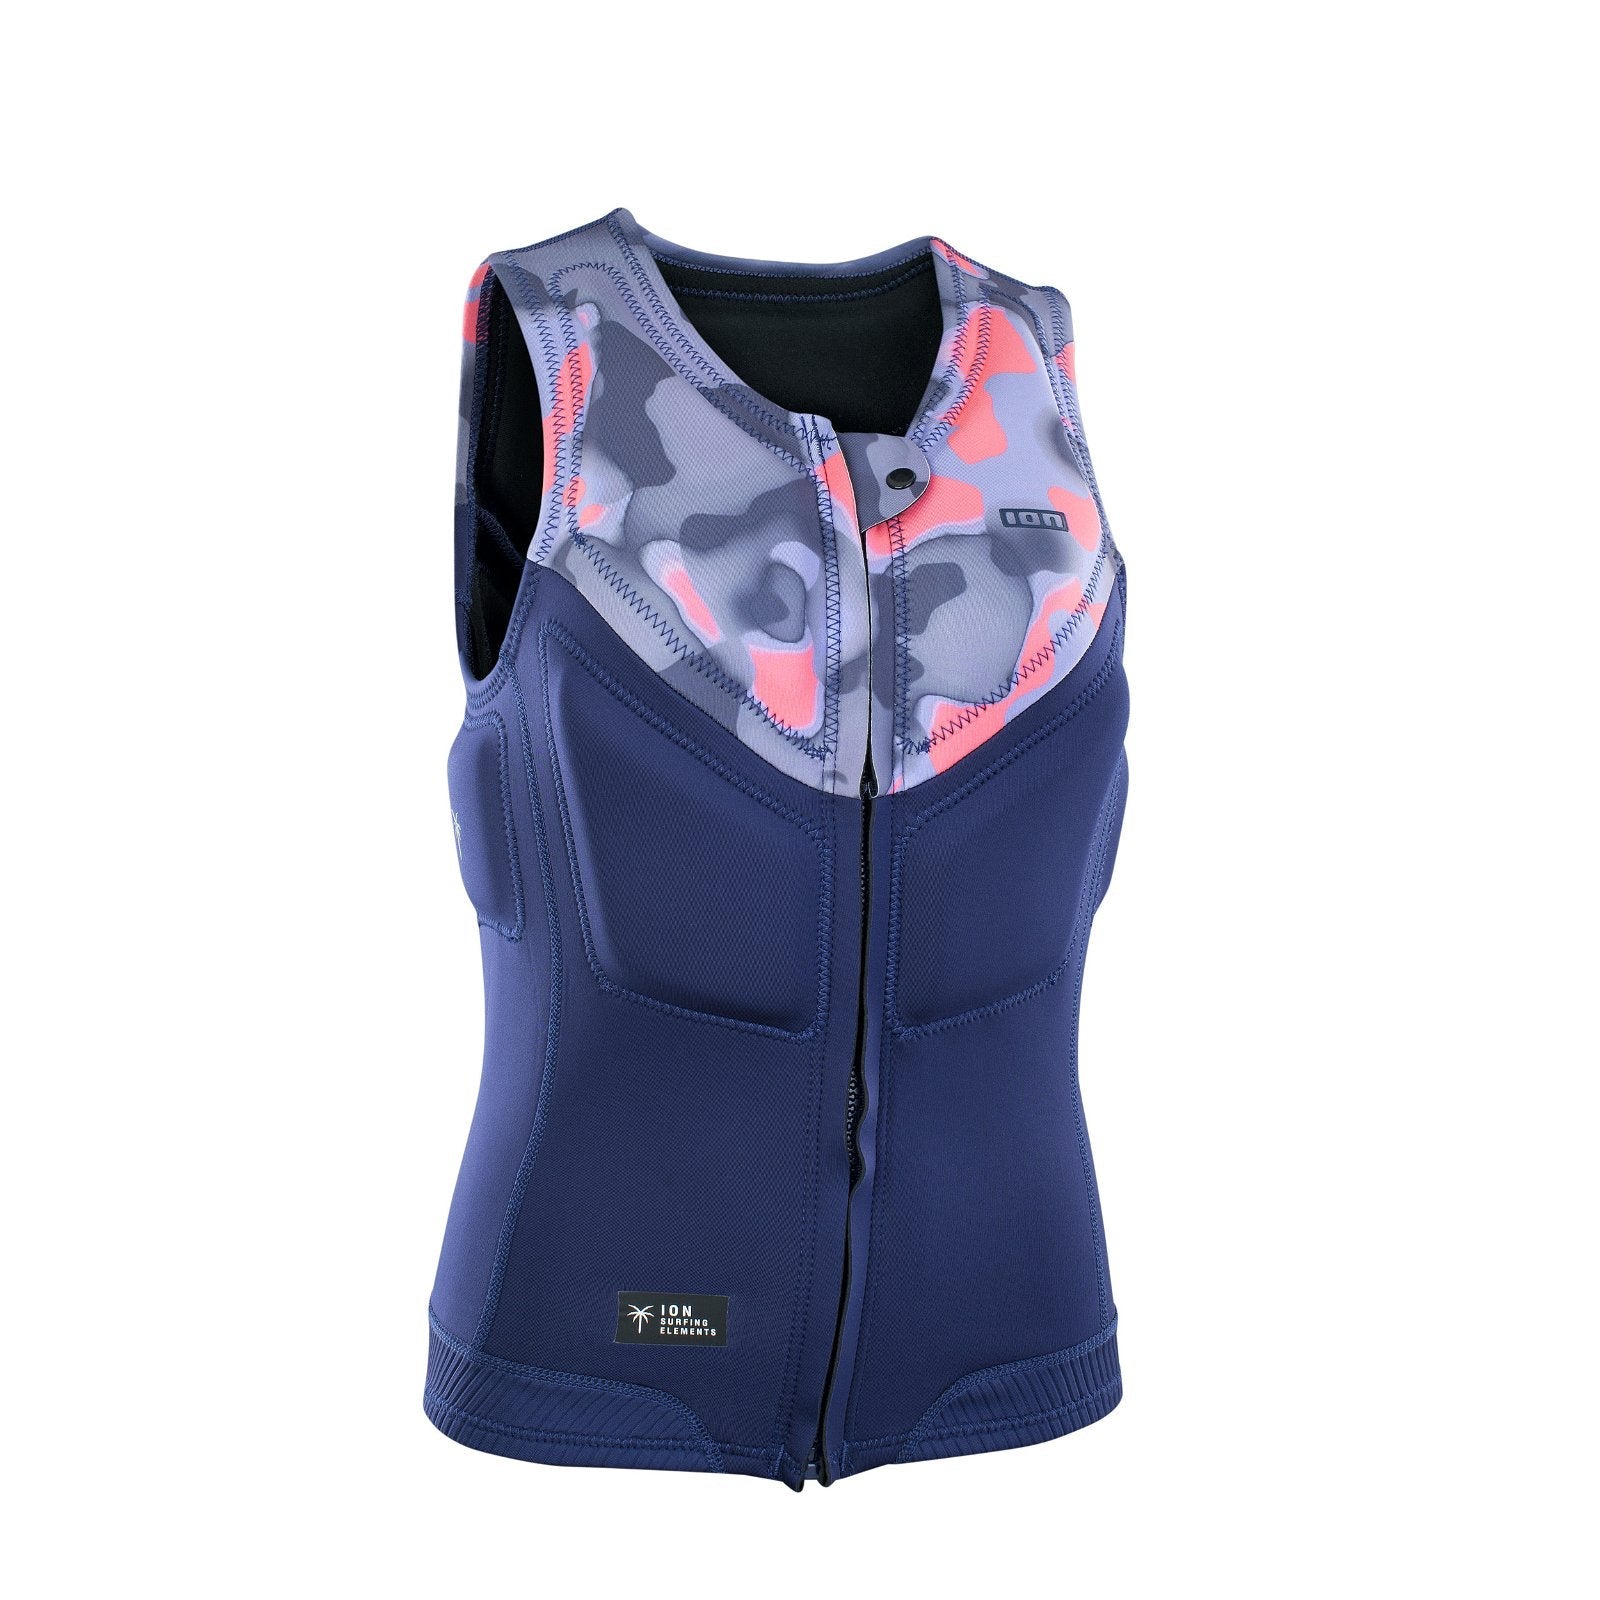 ION Ivy Vest Front Zip 2023-ION Water-L-Fuchsia-48213-4169-9010583051888-Surf-store.com